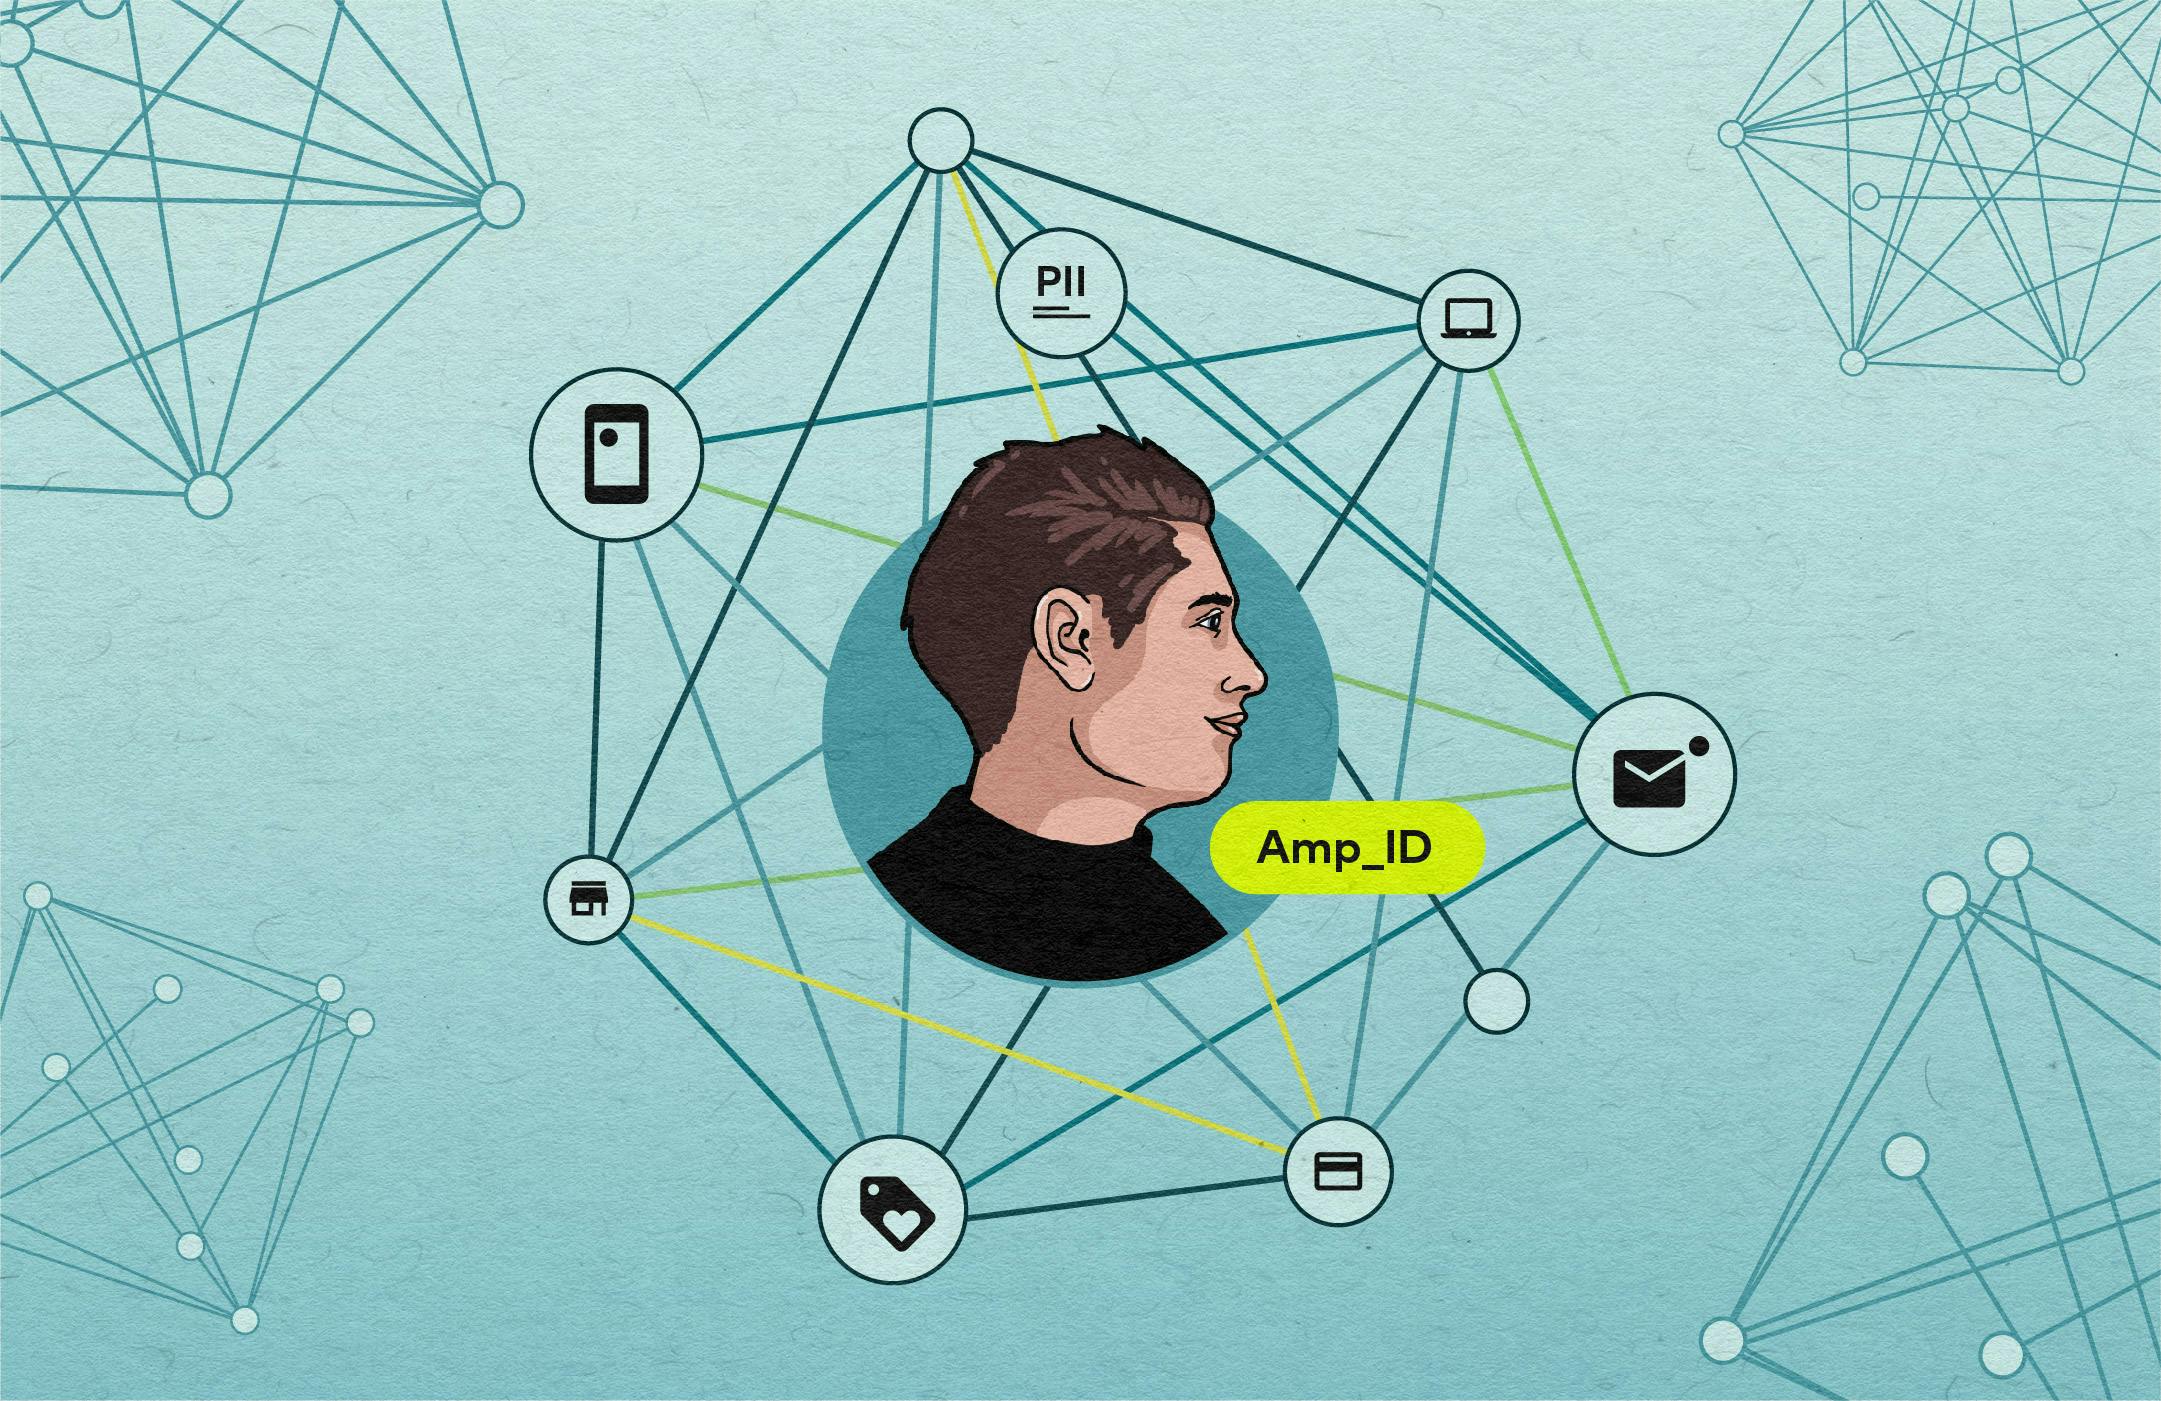 Illustration of man's profile with tag "Amp_ID" in the center of a cluster graph.